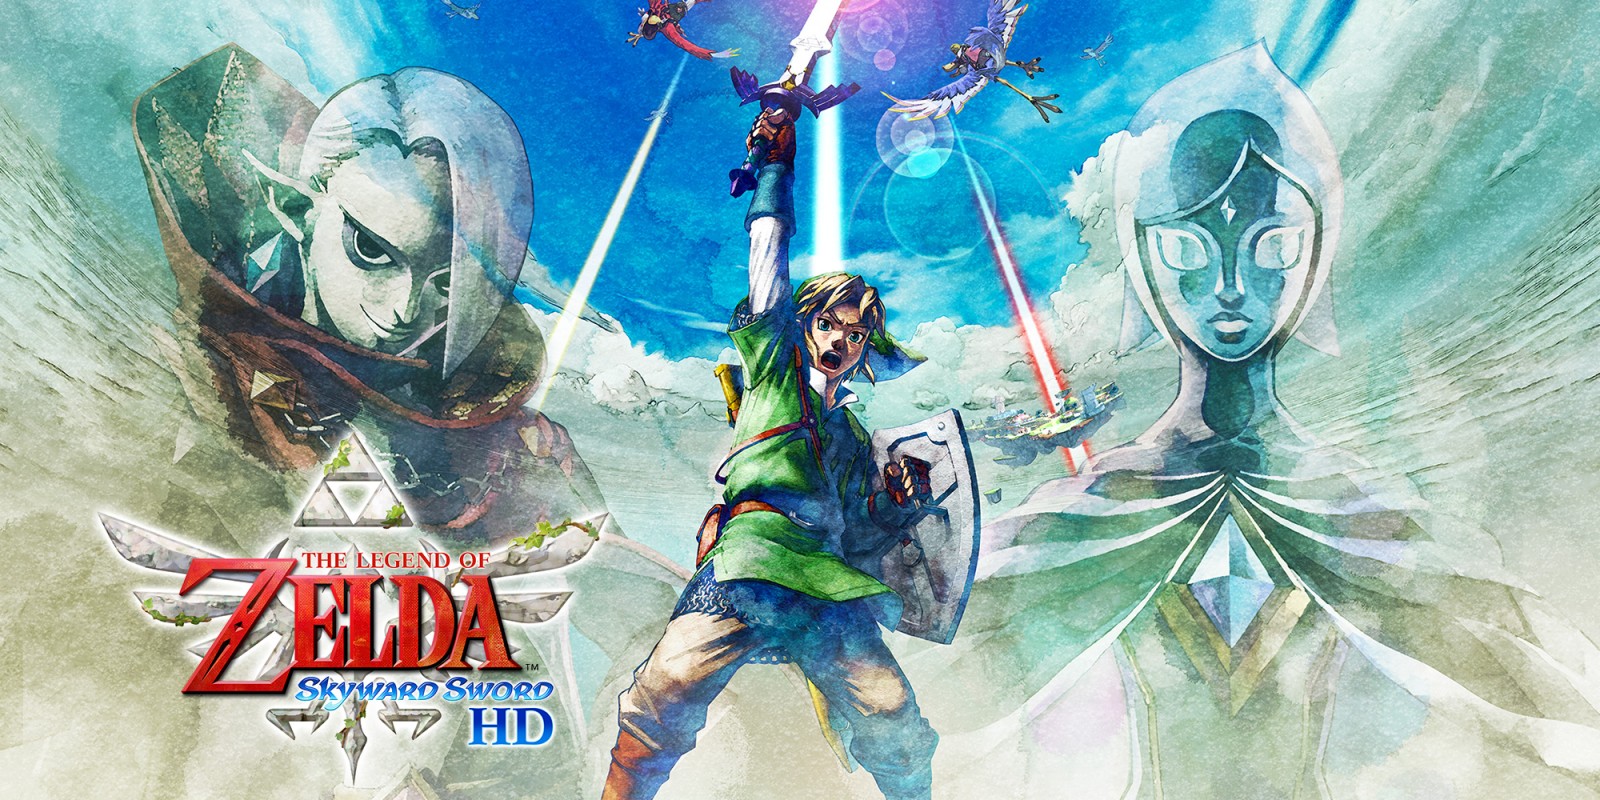 ‘The Legend of Zelda: Skyward Sword HD' brings a divisive Nintendo game to a new generation on Switch